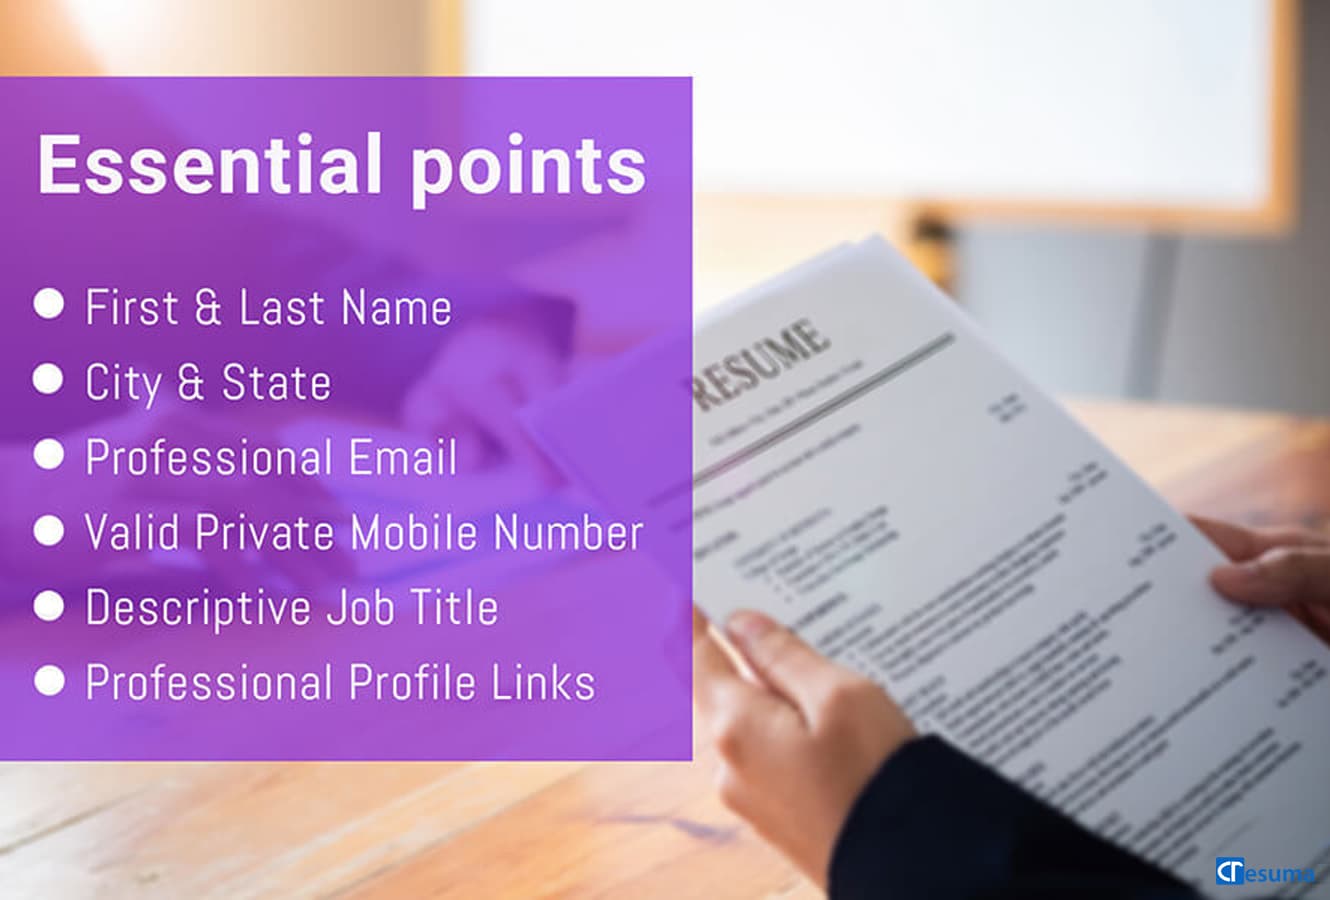  The most essential points for a Call Center Representative  resume header